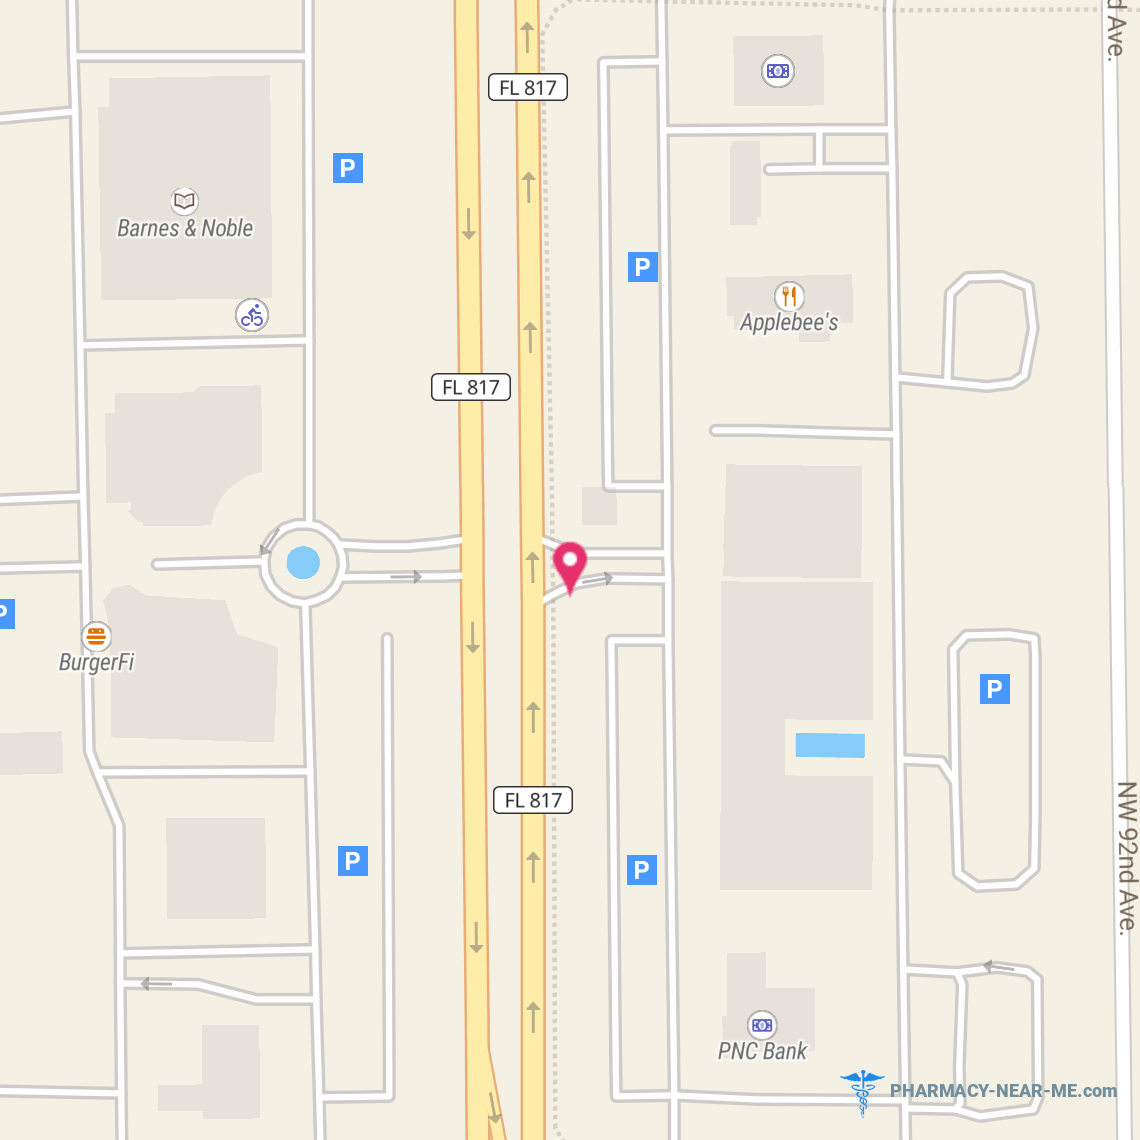 CVS PHARMACY #05247 - Pharmacy Hours, Phone, Reviews & Information: 2353 North University Drive, Coral Springs, Florida 33065, United States